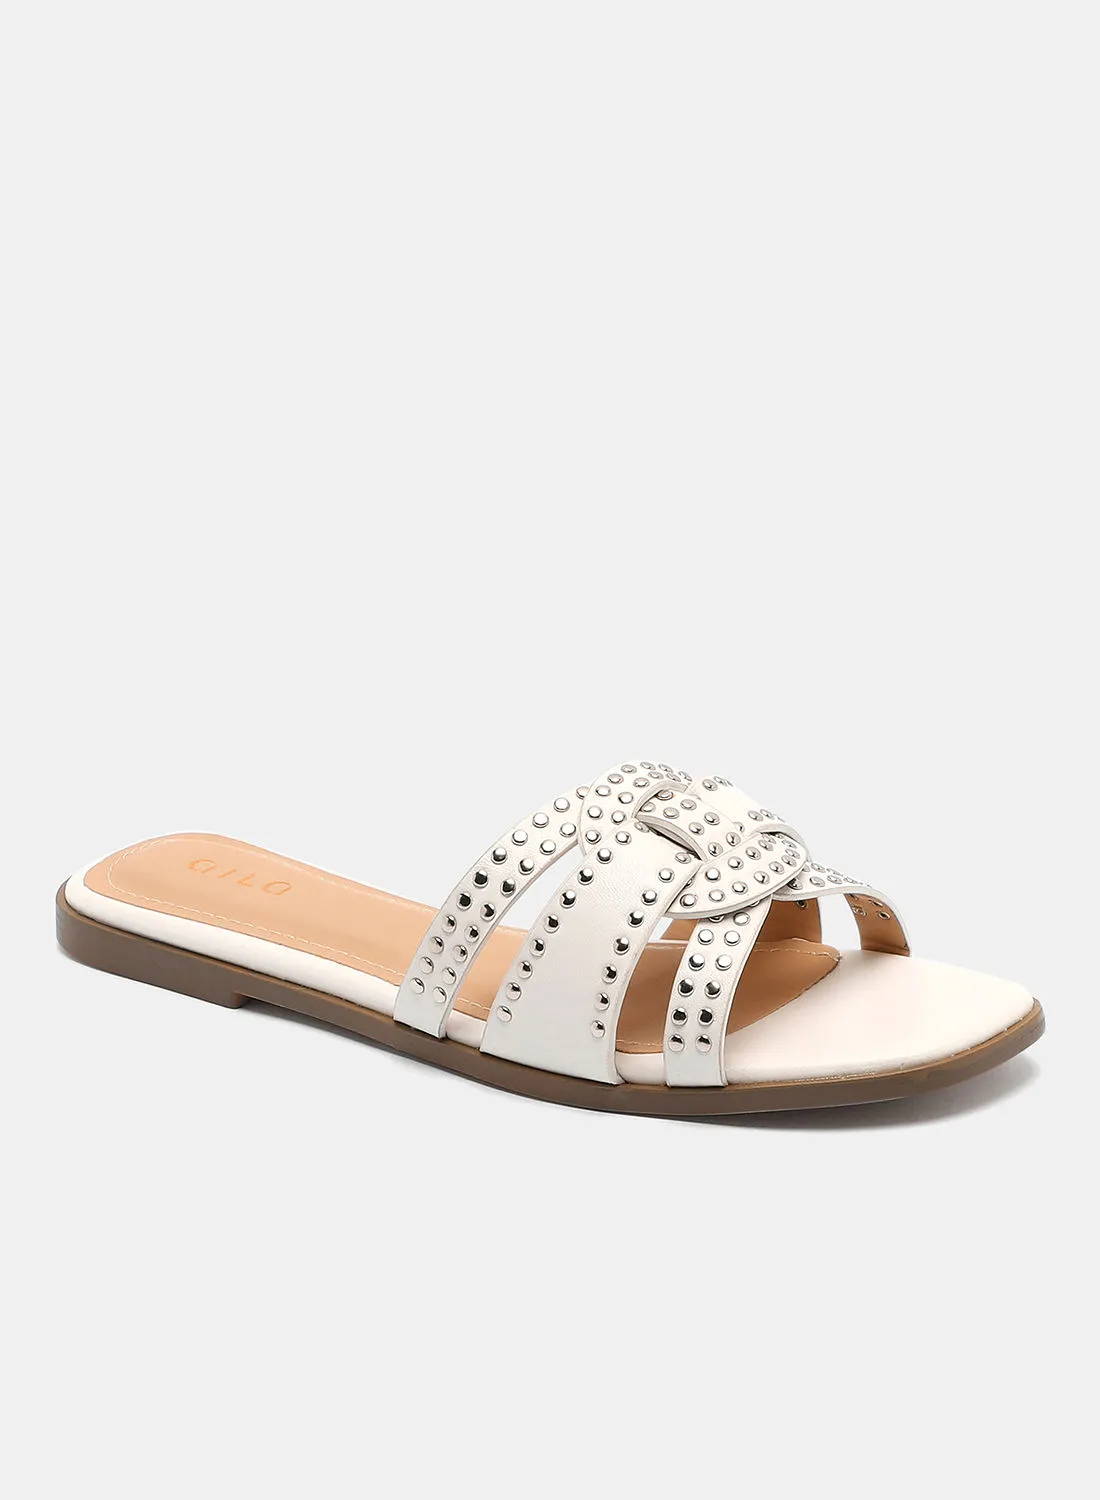 Aila Fashionable Casual Flat Sandals Off White/Silver